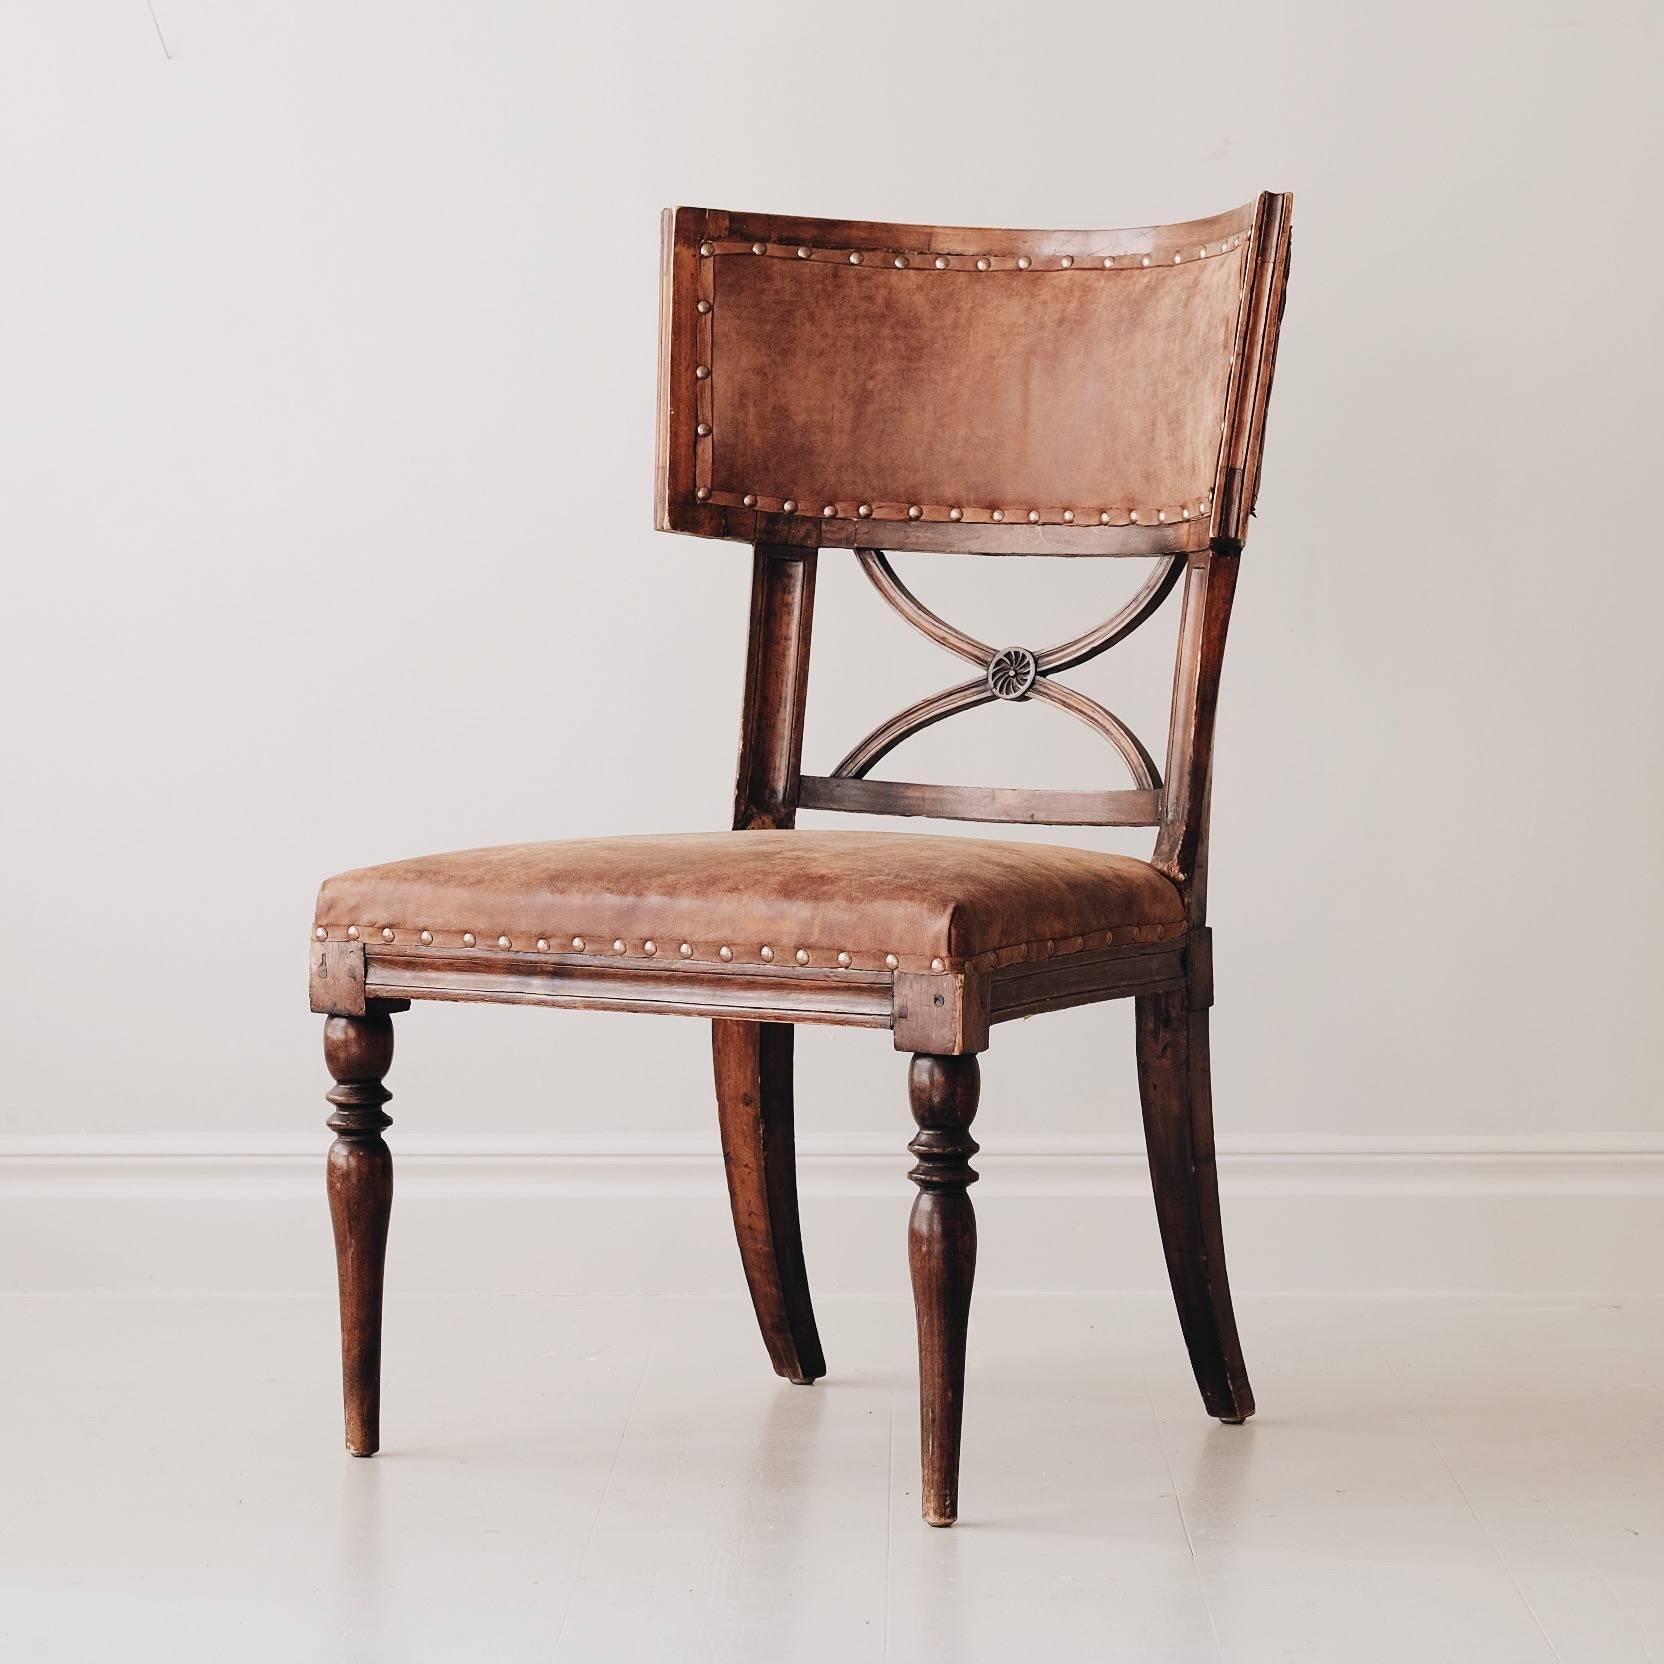 Swedish, 19th century, Gustavian, Klismos chair. 

Attributed to Stockholm Master Ephraim Stahl. Supplier to the Royal Court and one of the most sophisticated and inventive makers of his period.

Condition: Good. 
Wear: Wear consistent with age